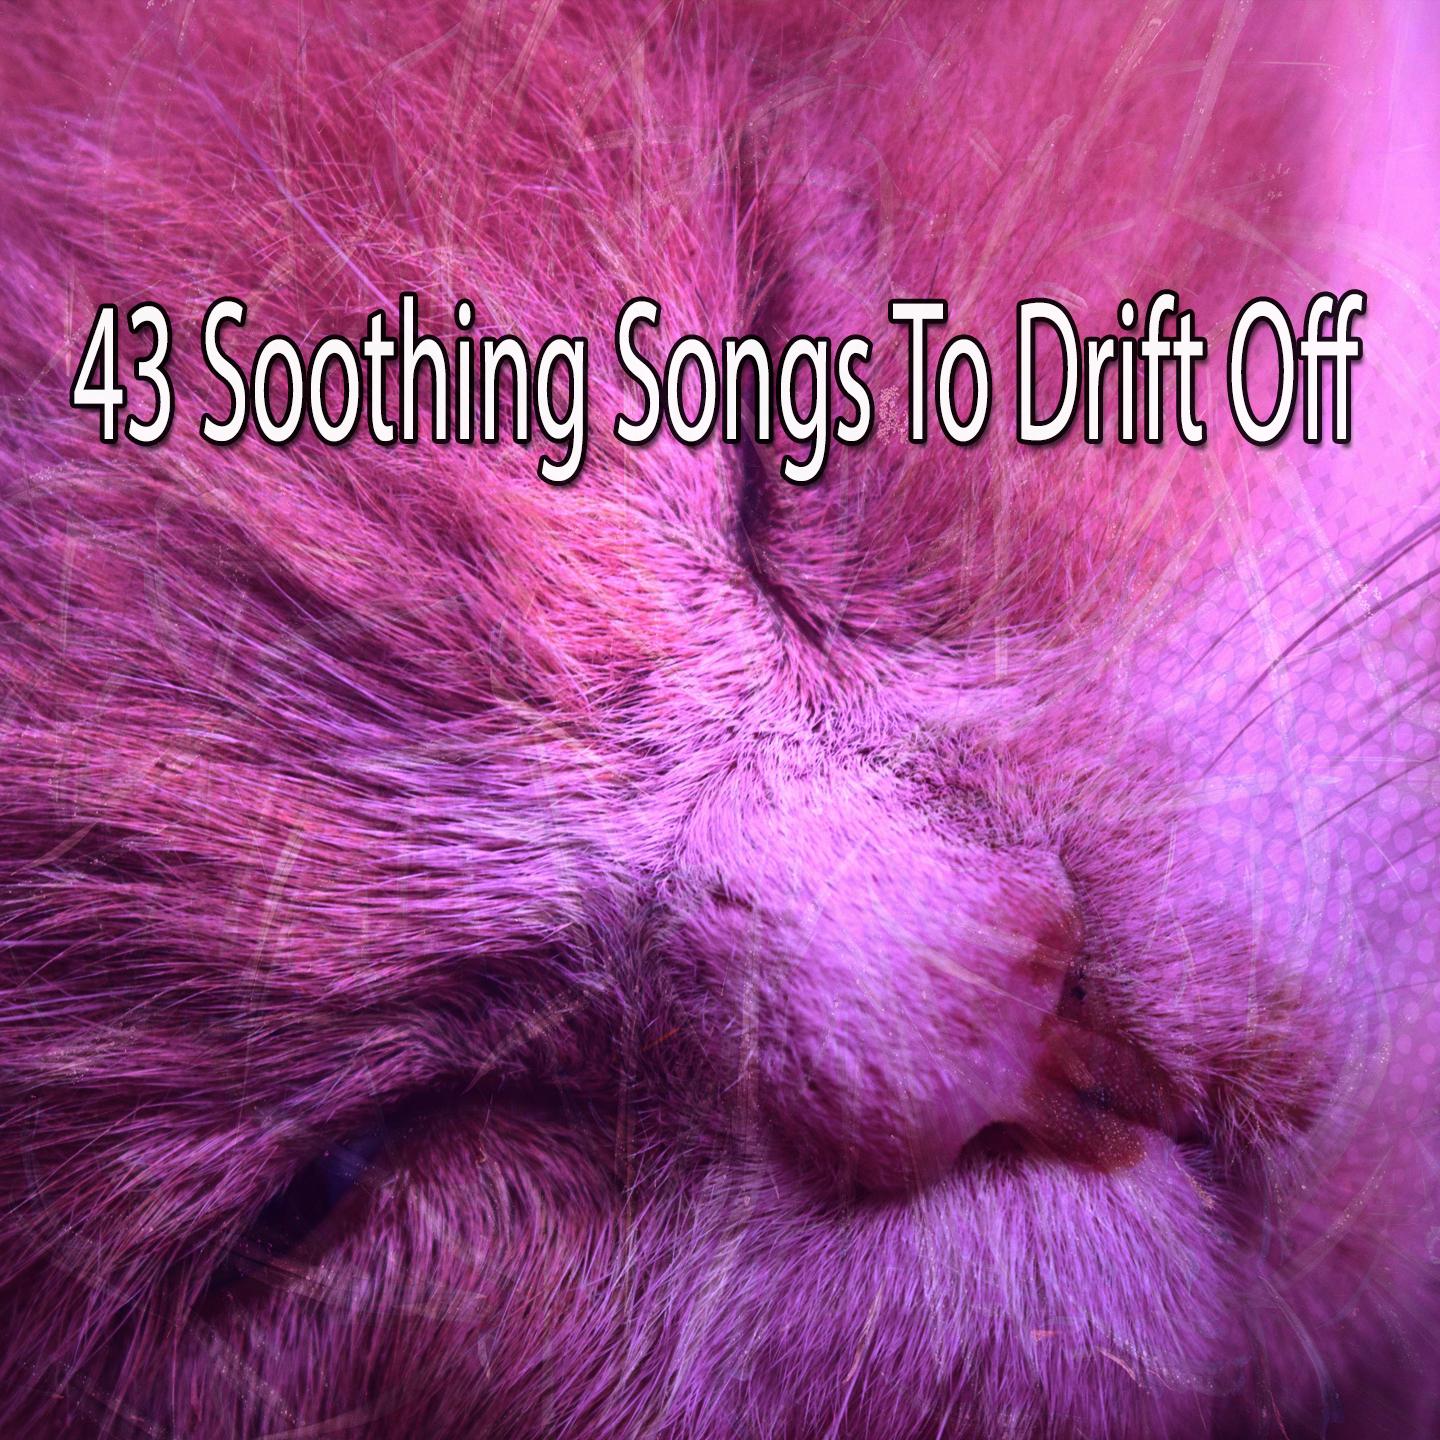 43 Soothing Songs to Drift Off